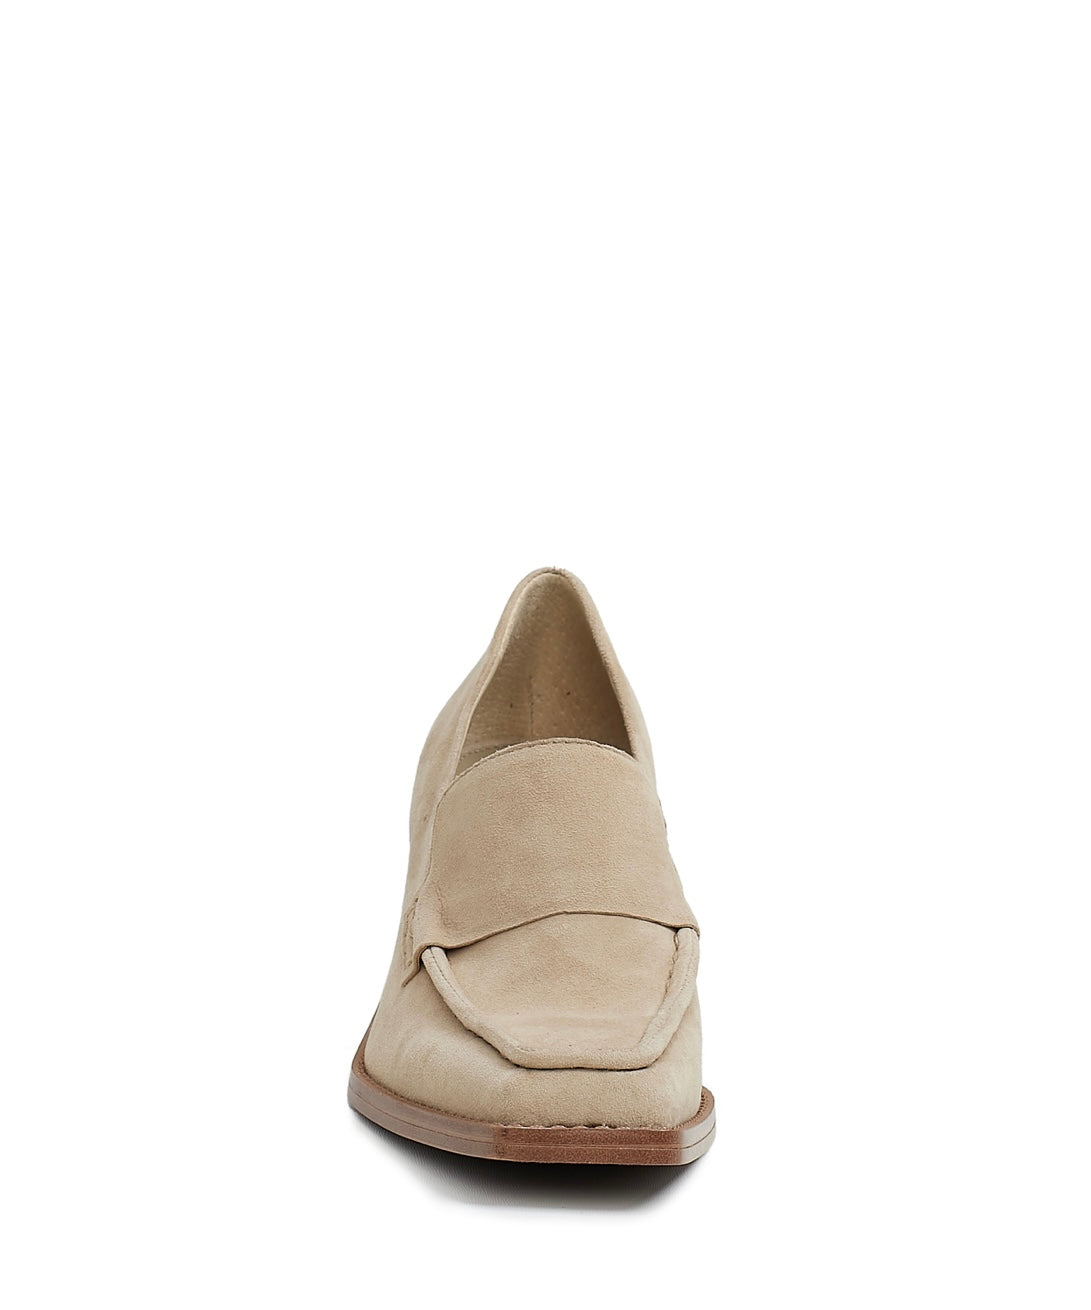 Vince Camuto Segellis Loafer Silver or Tan